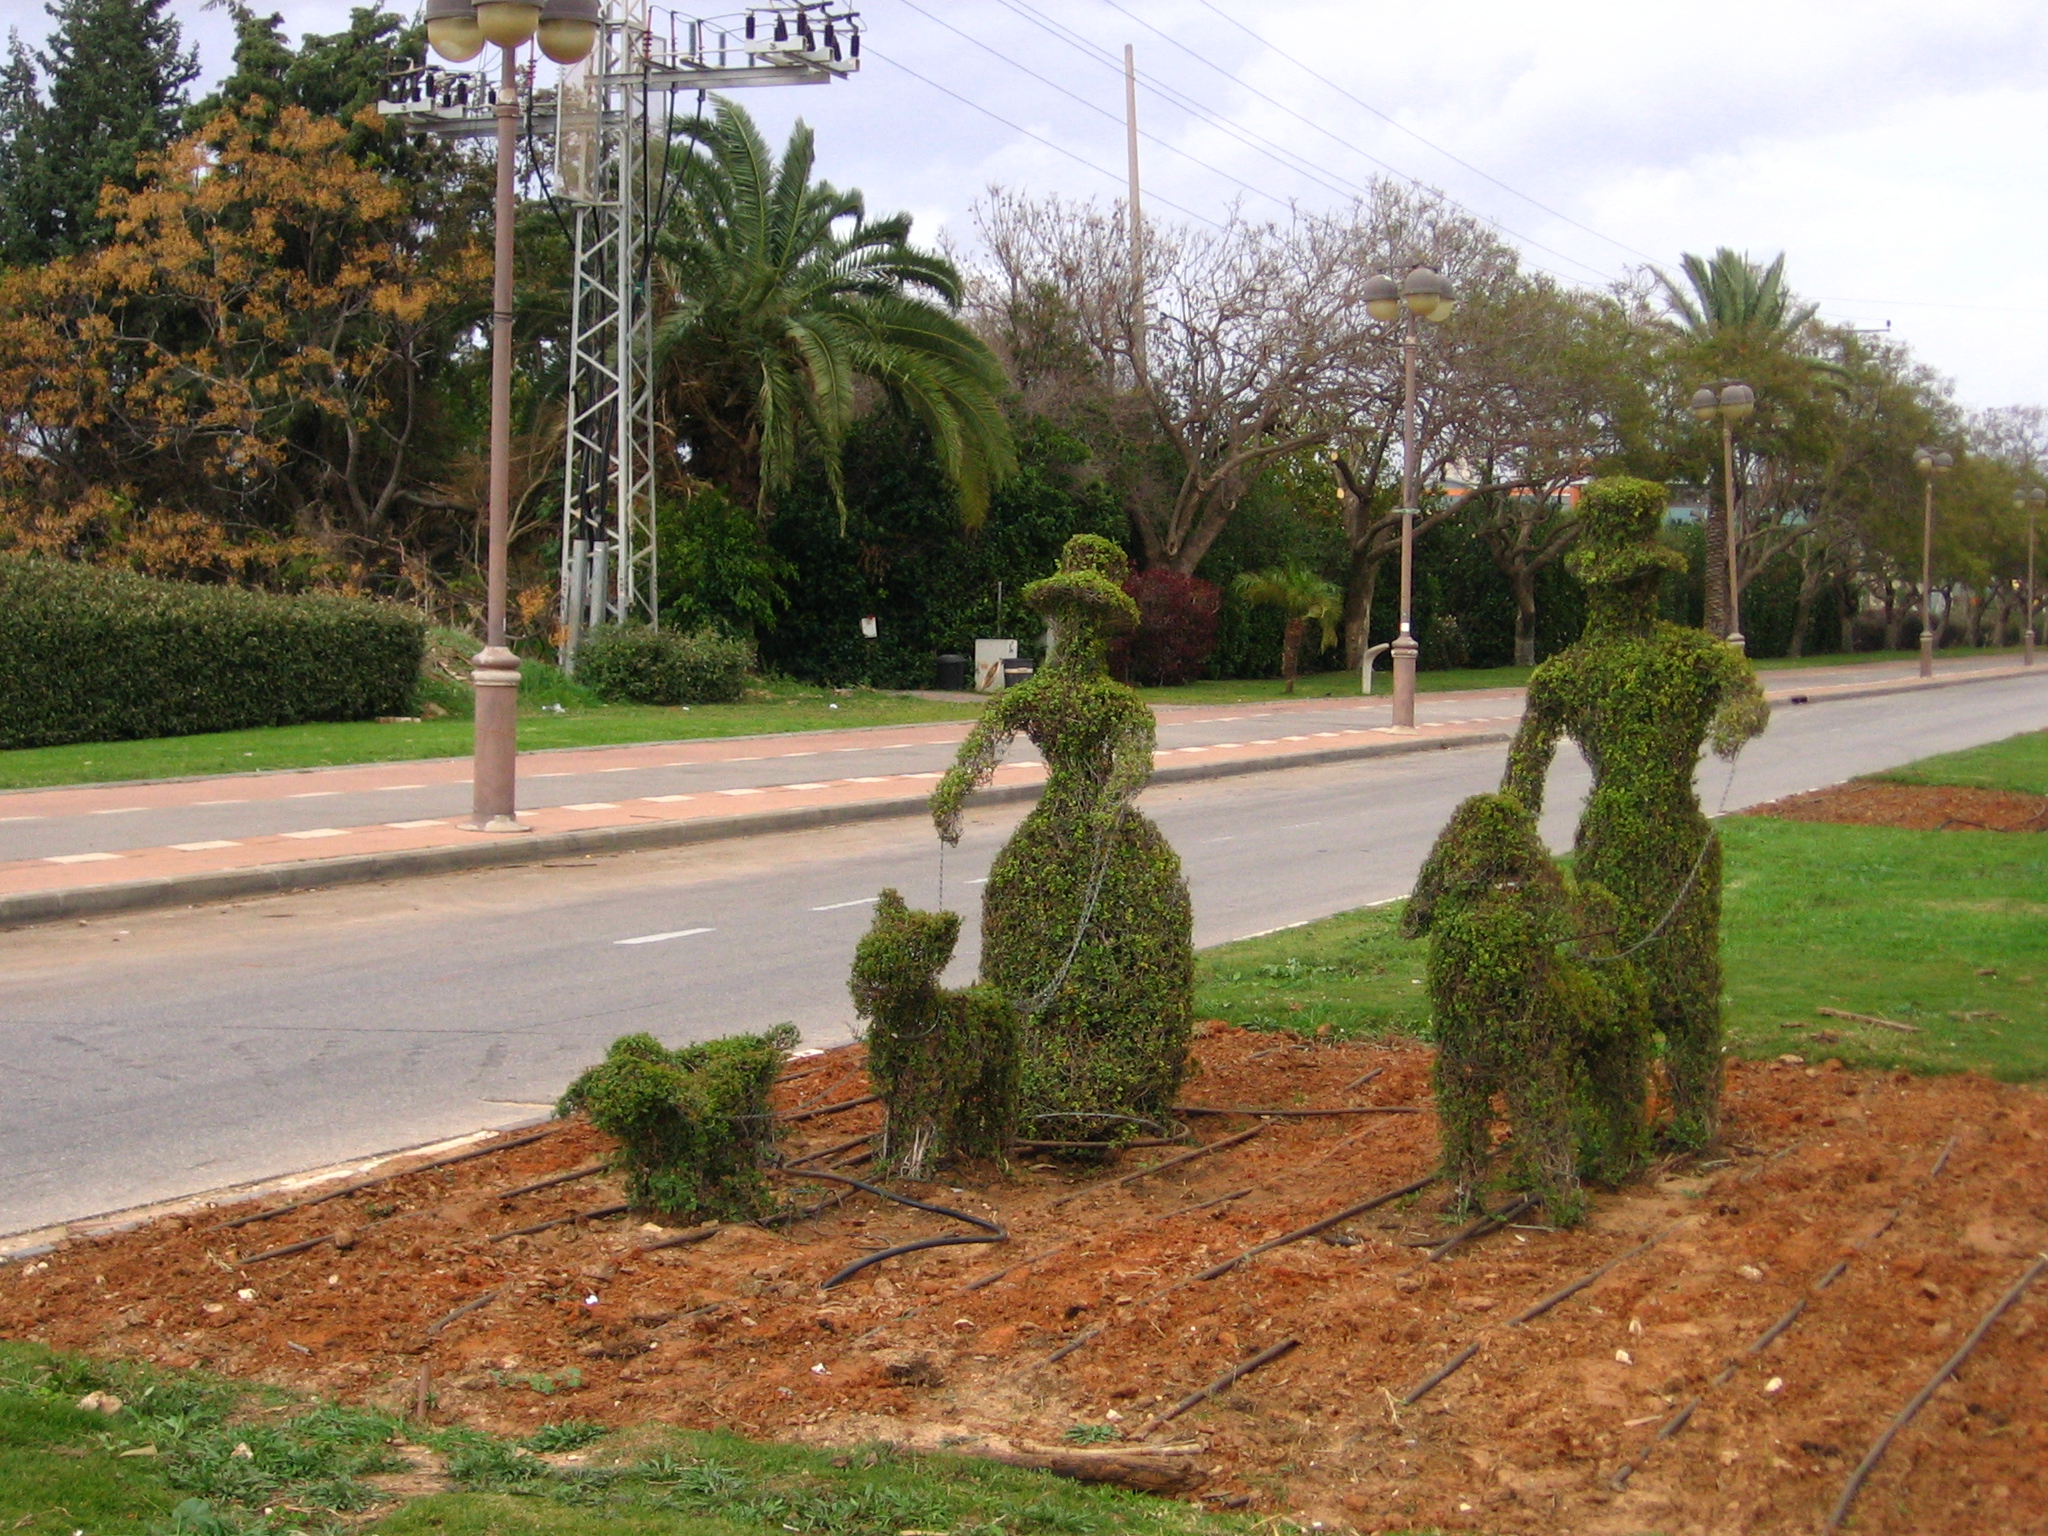 some cute looking garden art made to look like people